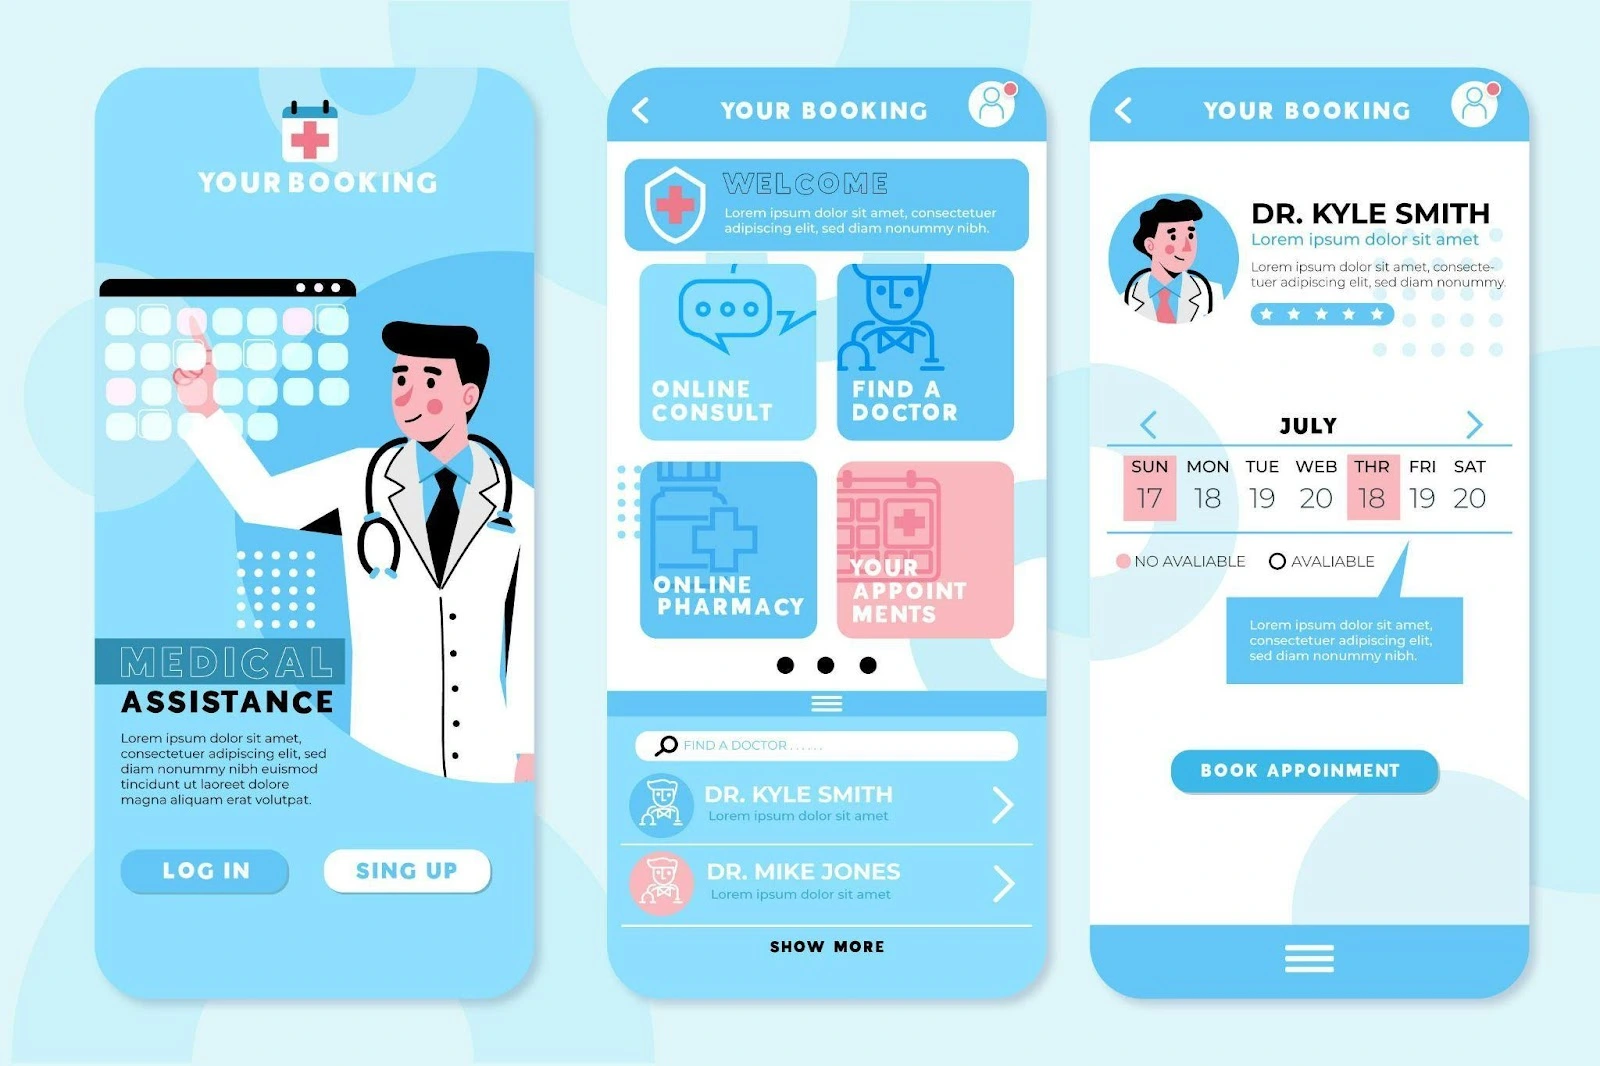 Illustration of a healthcare mobile app with a friendly doctor character, appointment scheduling feature, and various medical services offered.